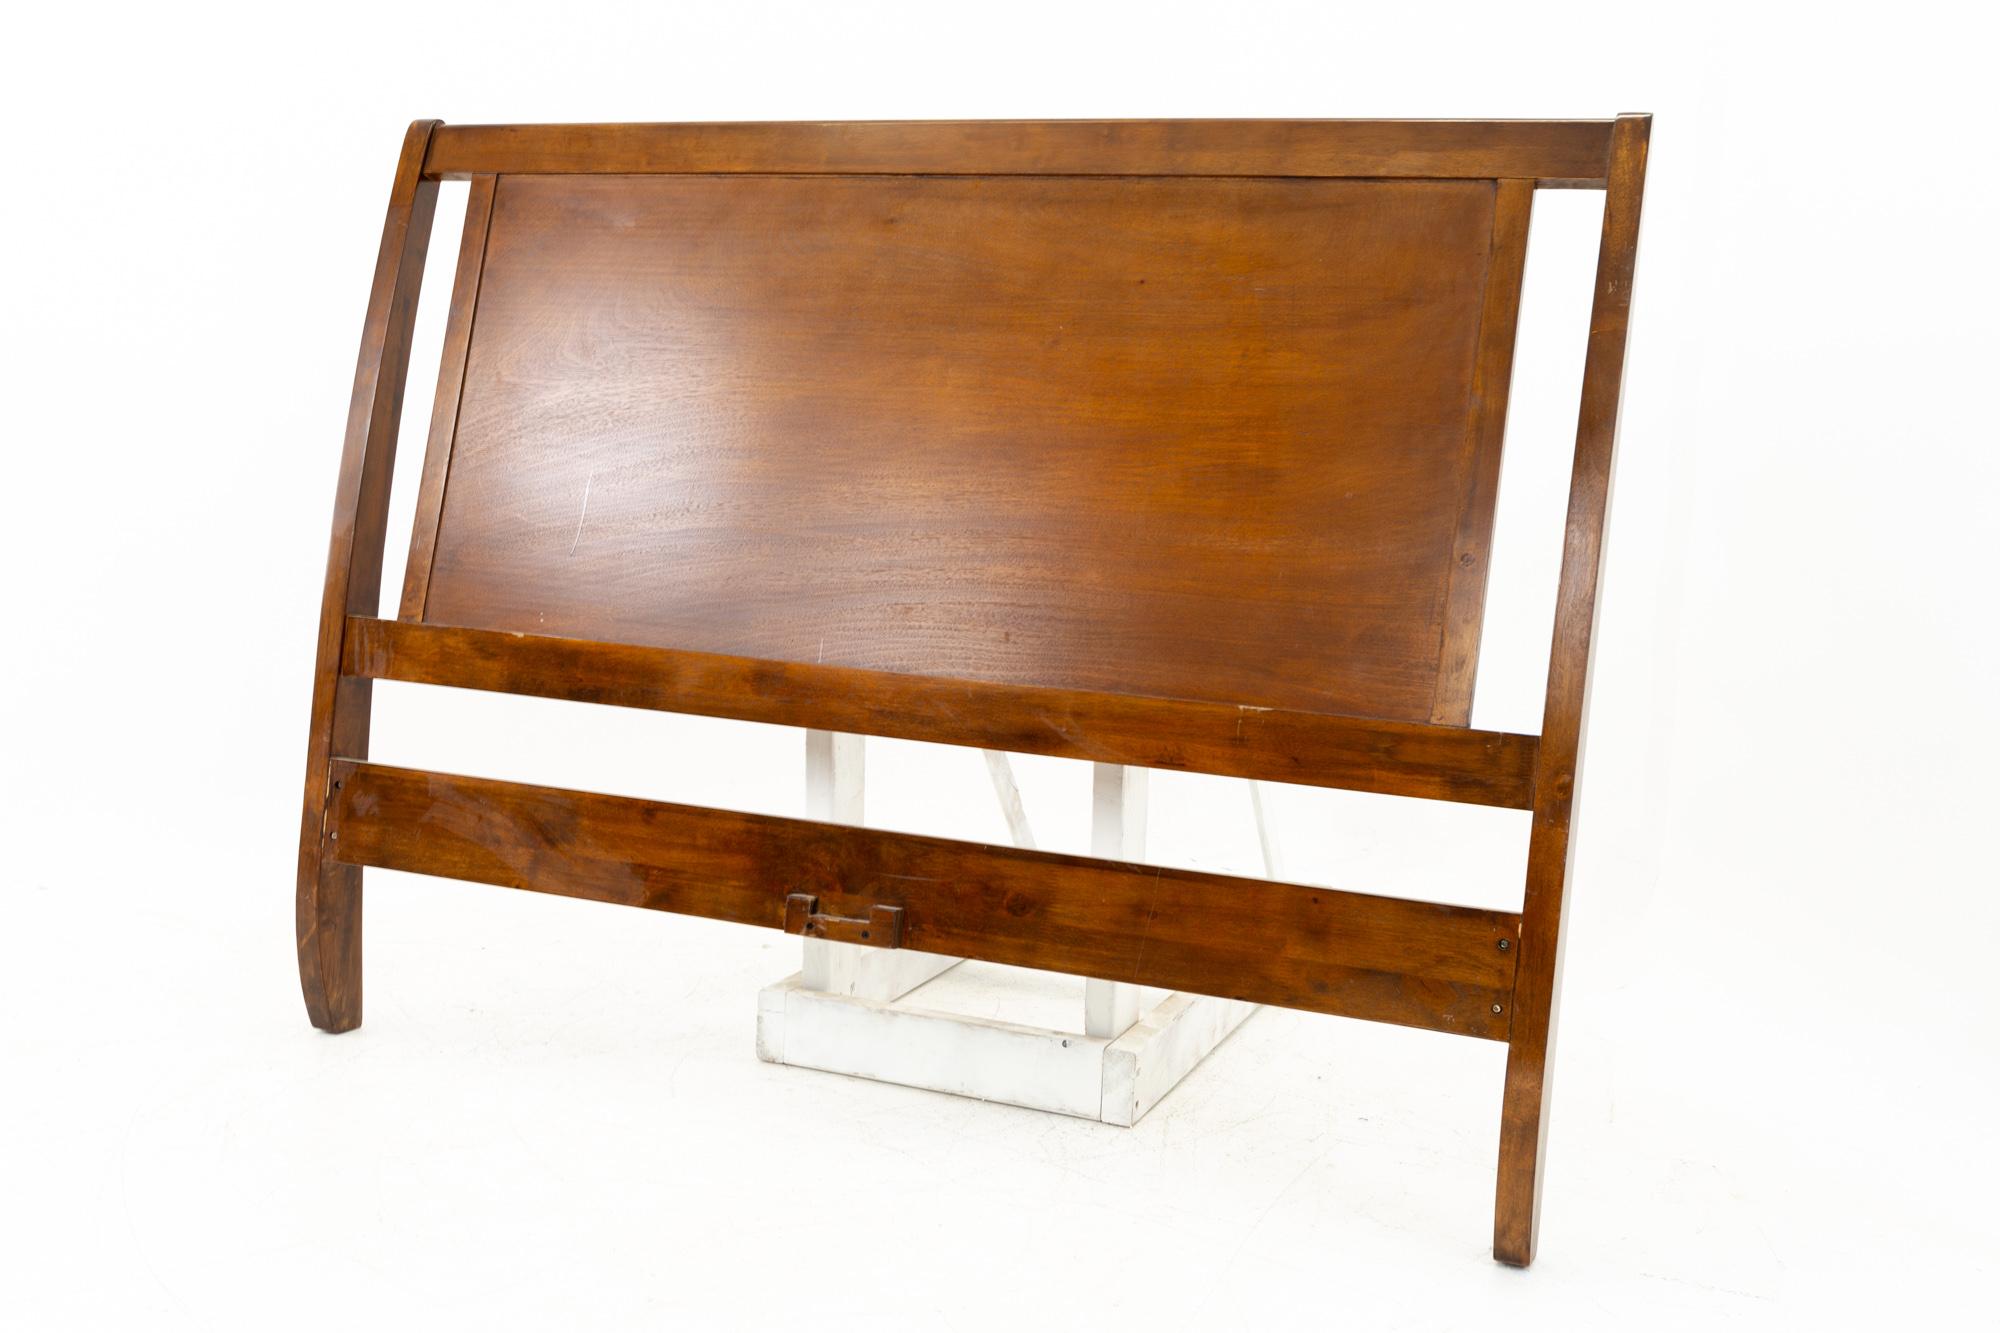 Mid century sleigh walnut queen headboard
This headboard is 56.75 wide x 3 deep x 43.5 inches high

All pieces of furniture can be had in what we call restored vintage condition. That means the piece is restored upon purchase so it’s free of